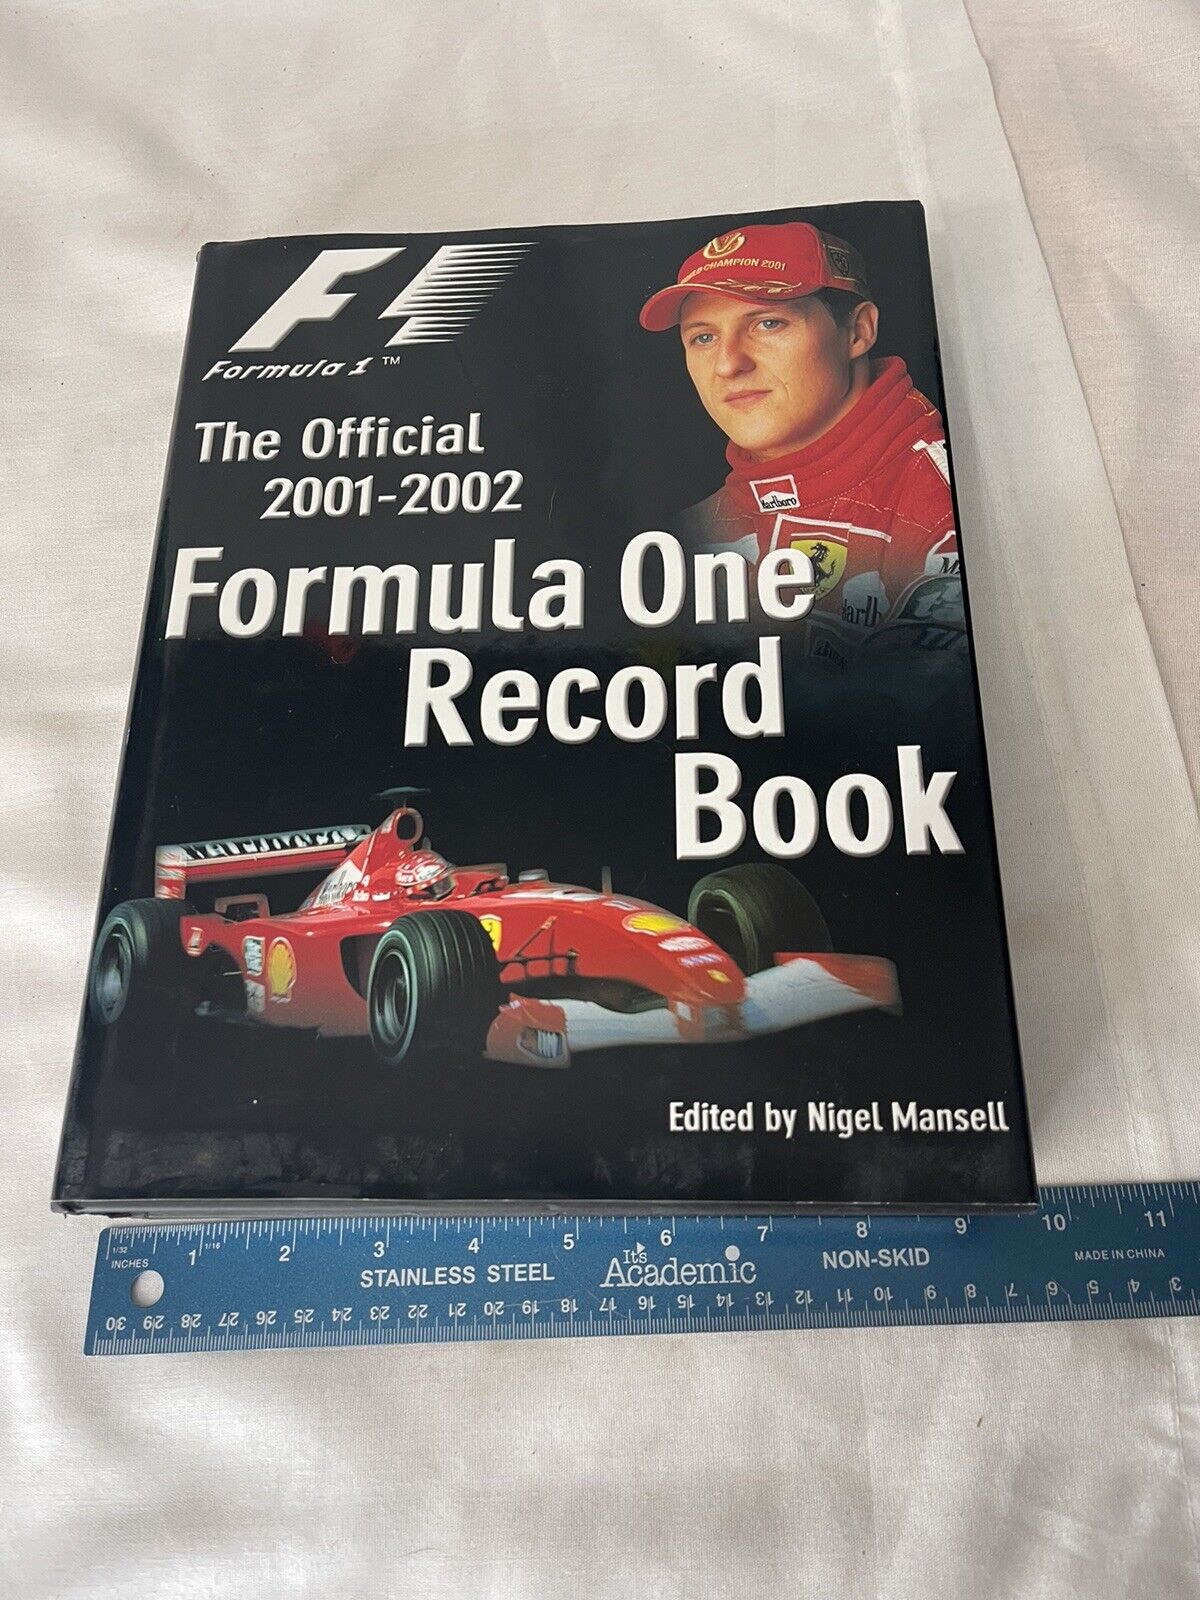 The Official 2001-2002 Formula One Record Book Vintage Large Coffee Table Racing